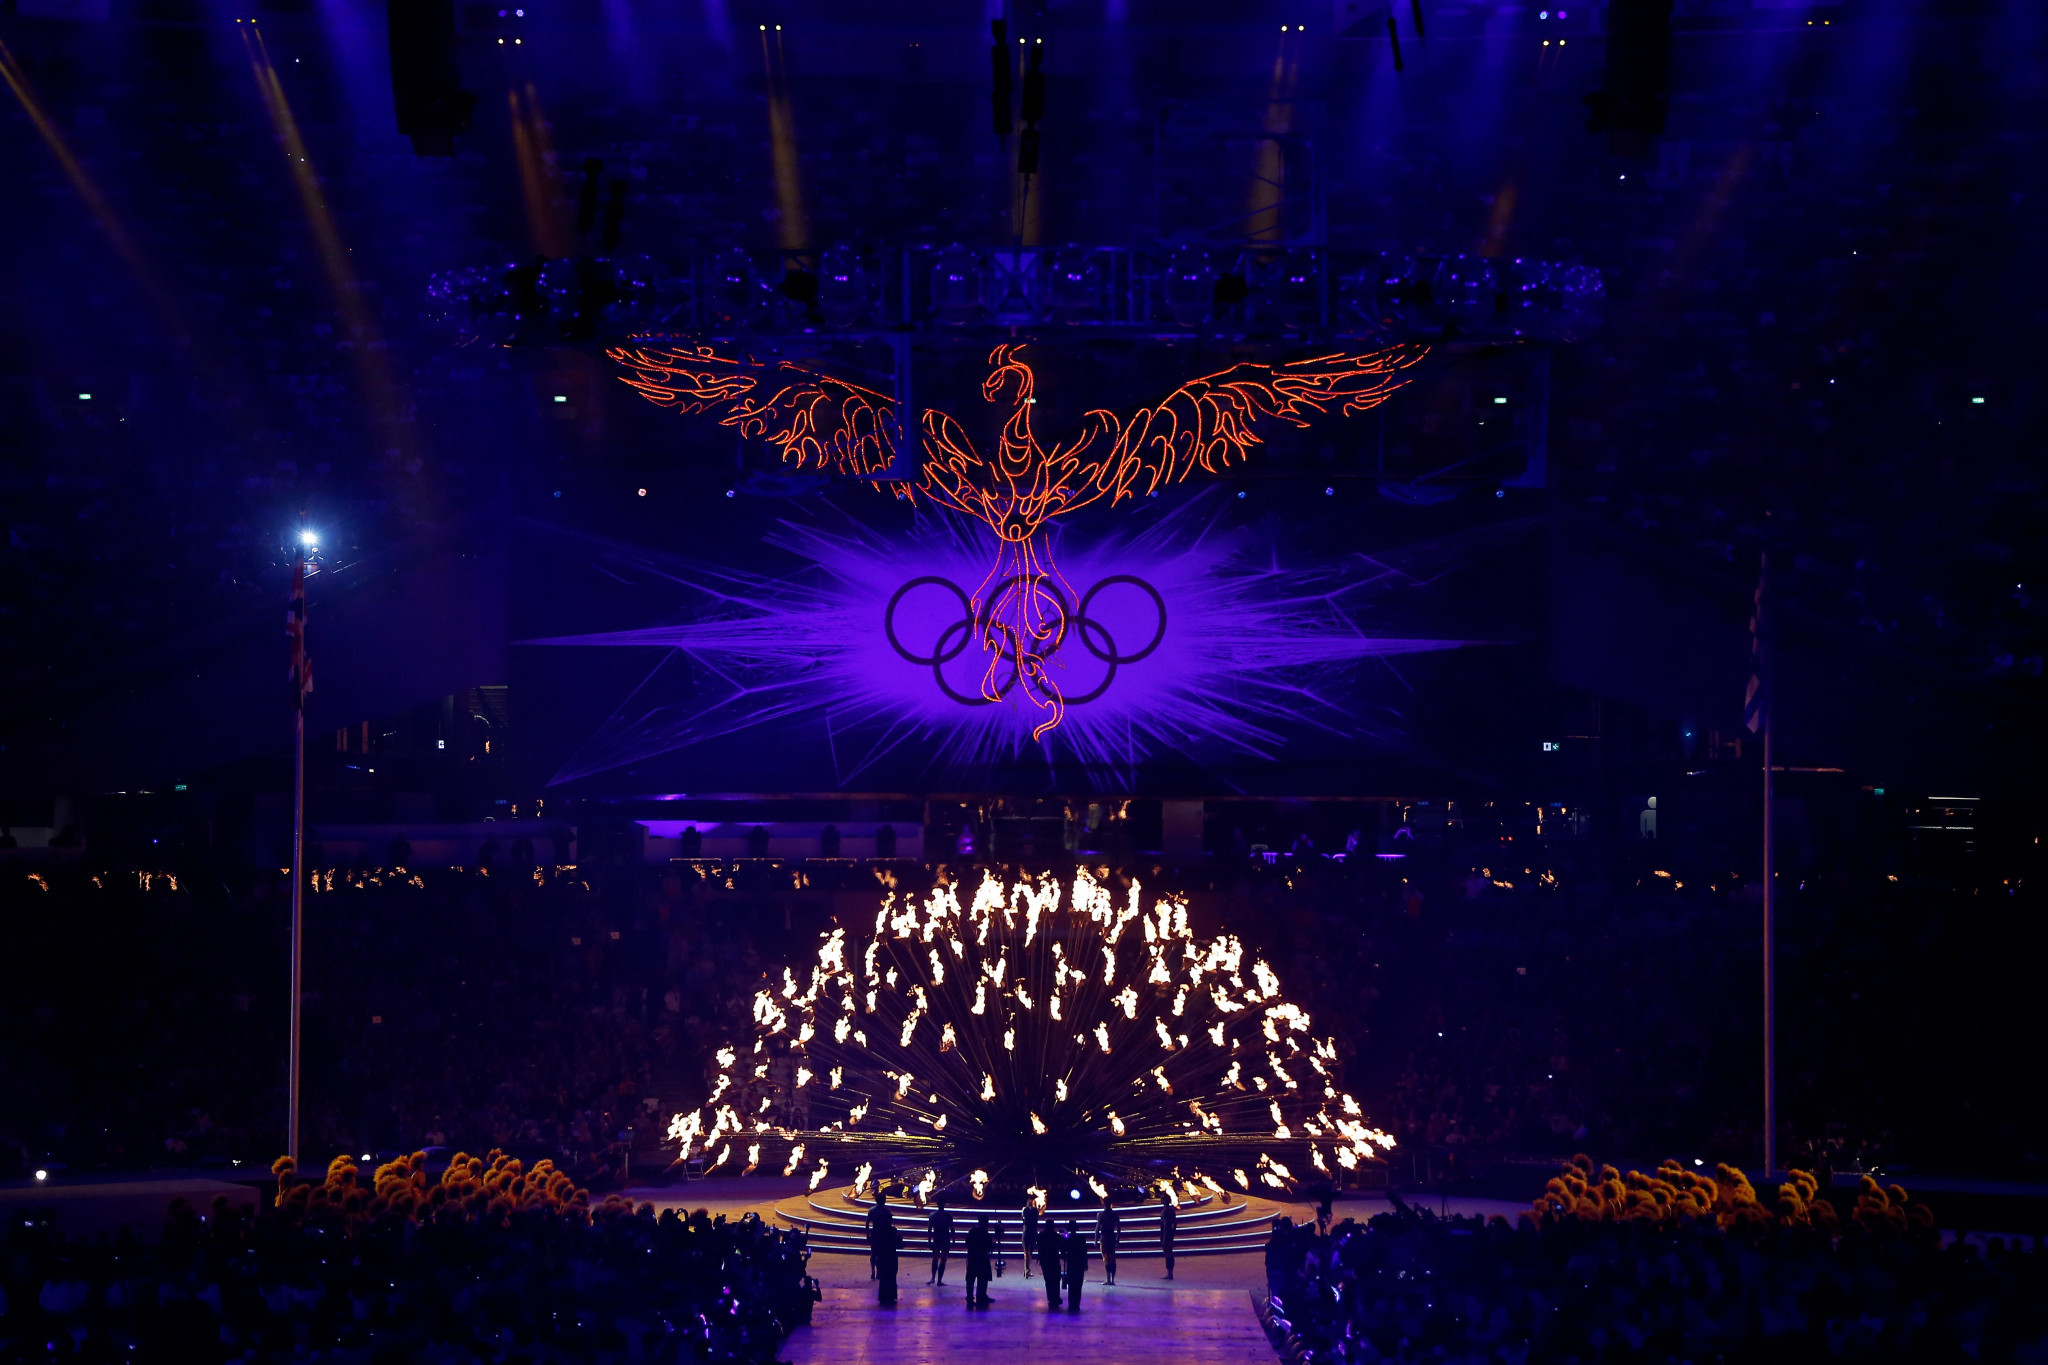 Sadness at the London 2012 closing ceremony reverberates in Birmingham ten years later